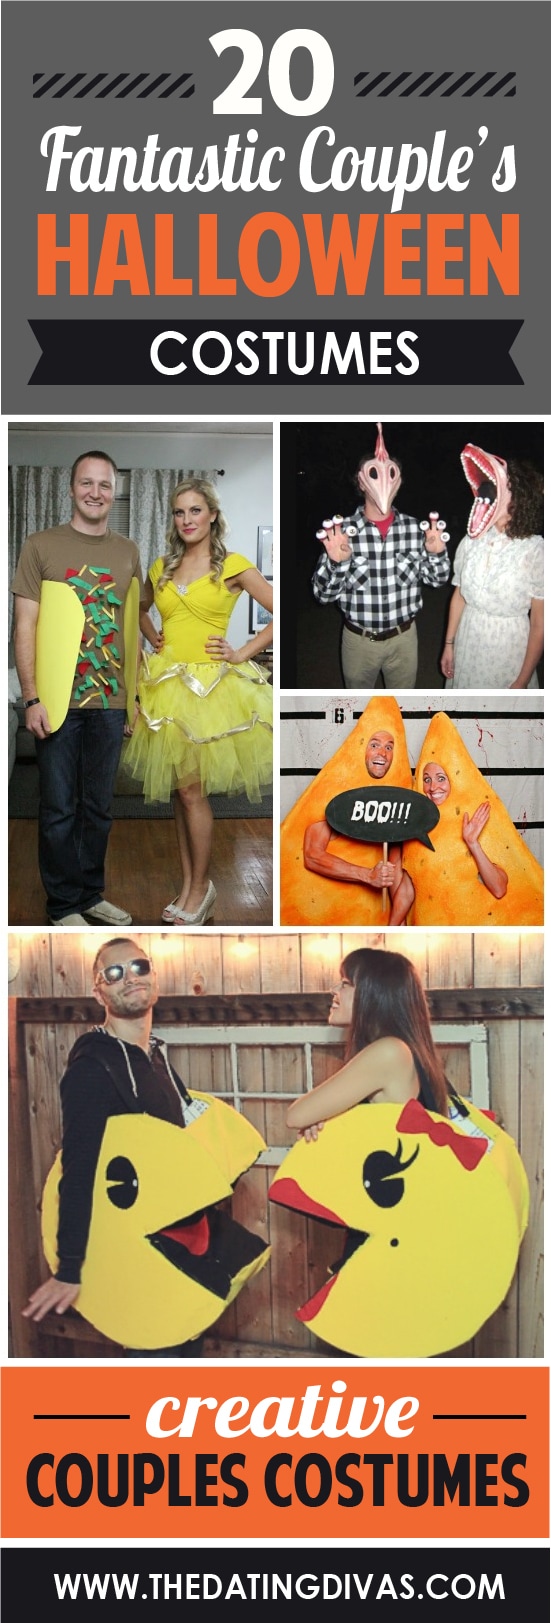 20 great halloween costumes for couples